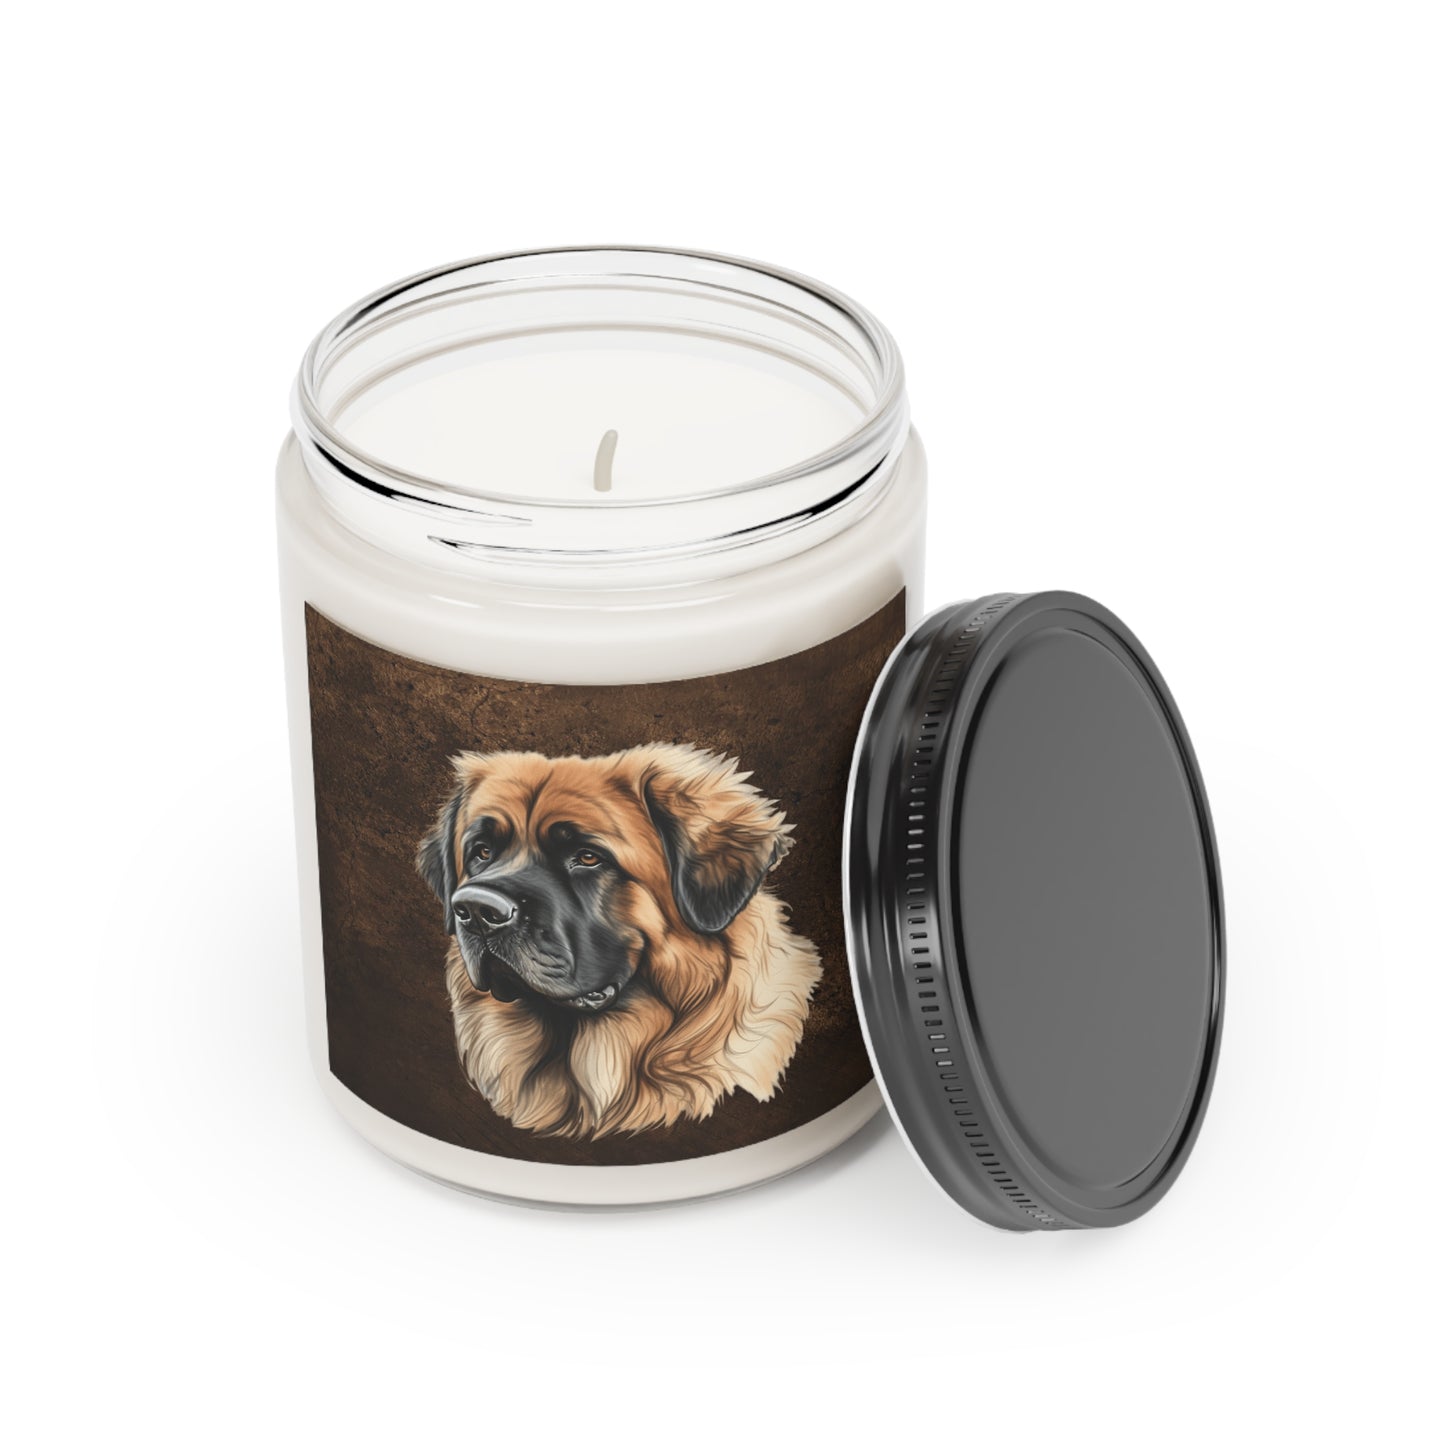 Leonberger Scented Candle, 9oz